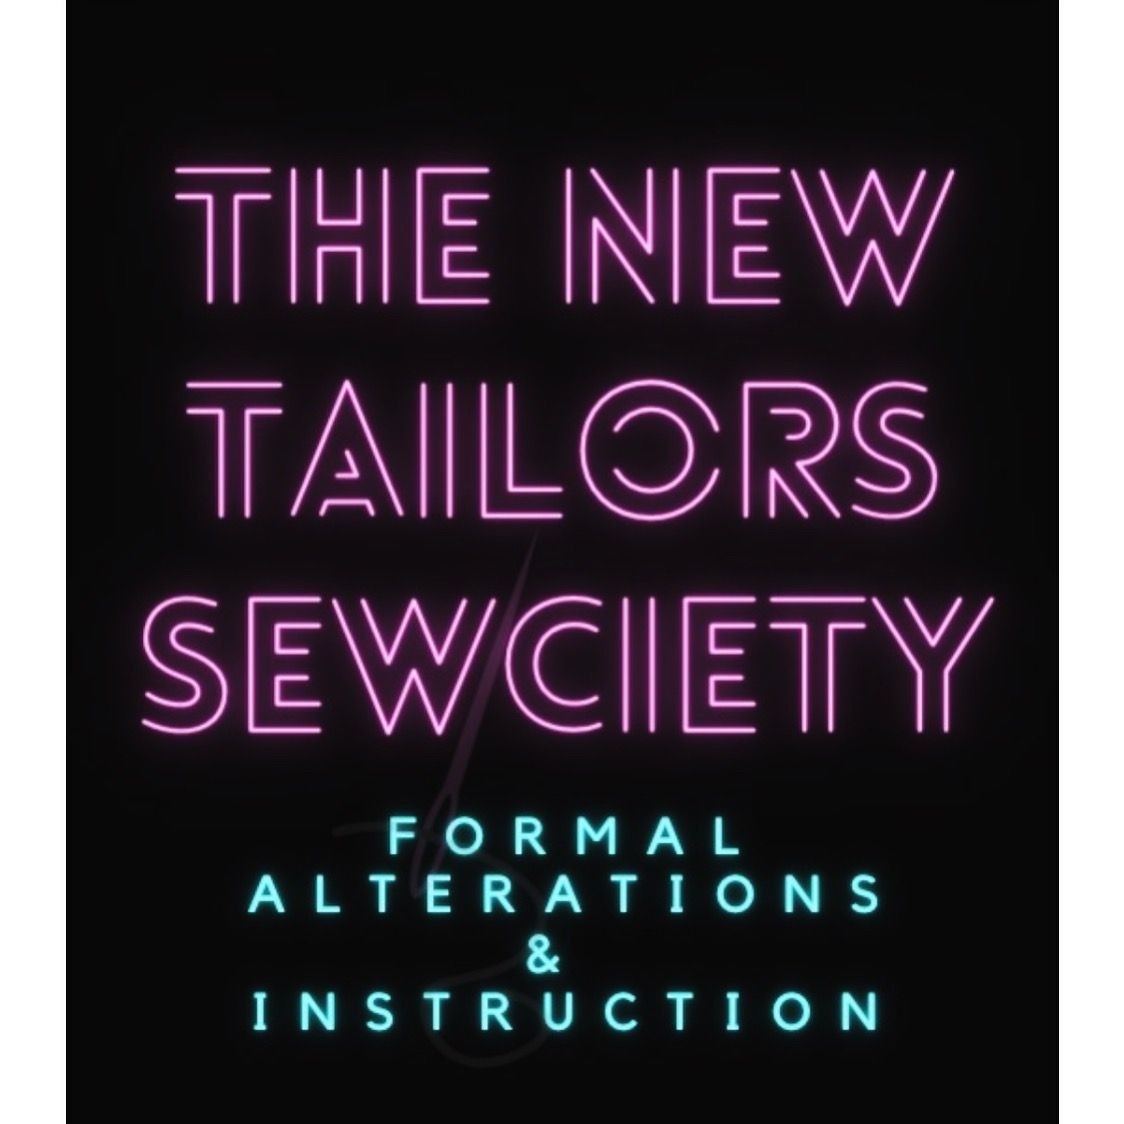 The New Tailors Sewciety